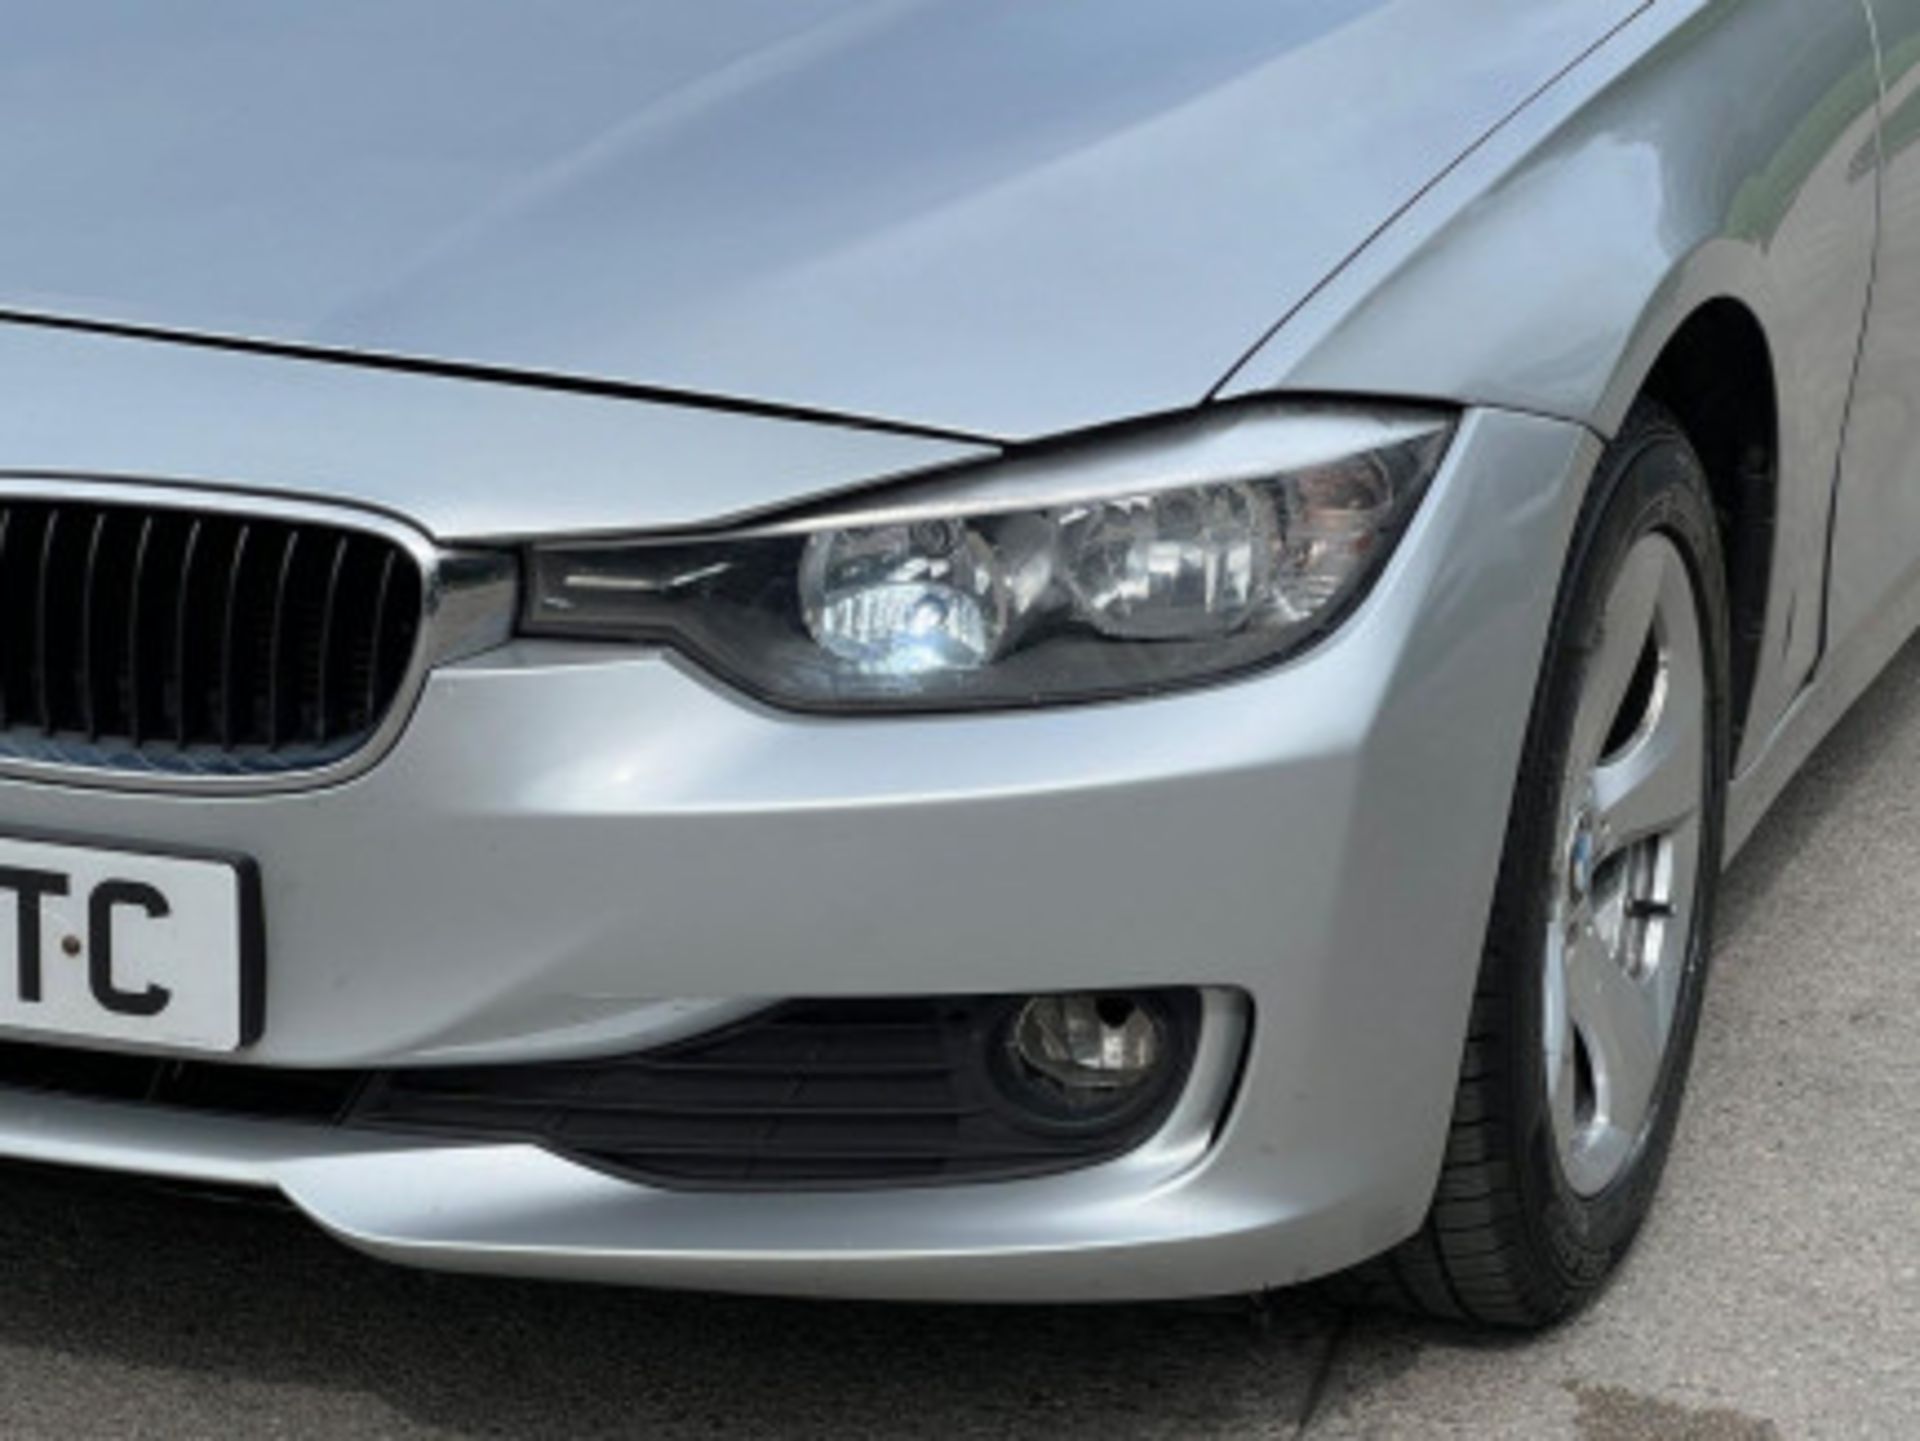 BMW 3 SERIES 2.0 DIESEL ED START STOP - A WELL-MAINTAINED GEM >>--NO VAT ON HAMMER--<< - Image 90 of 229